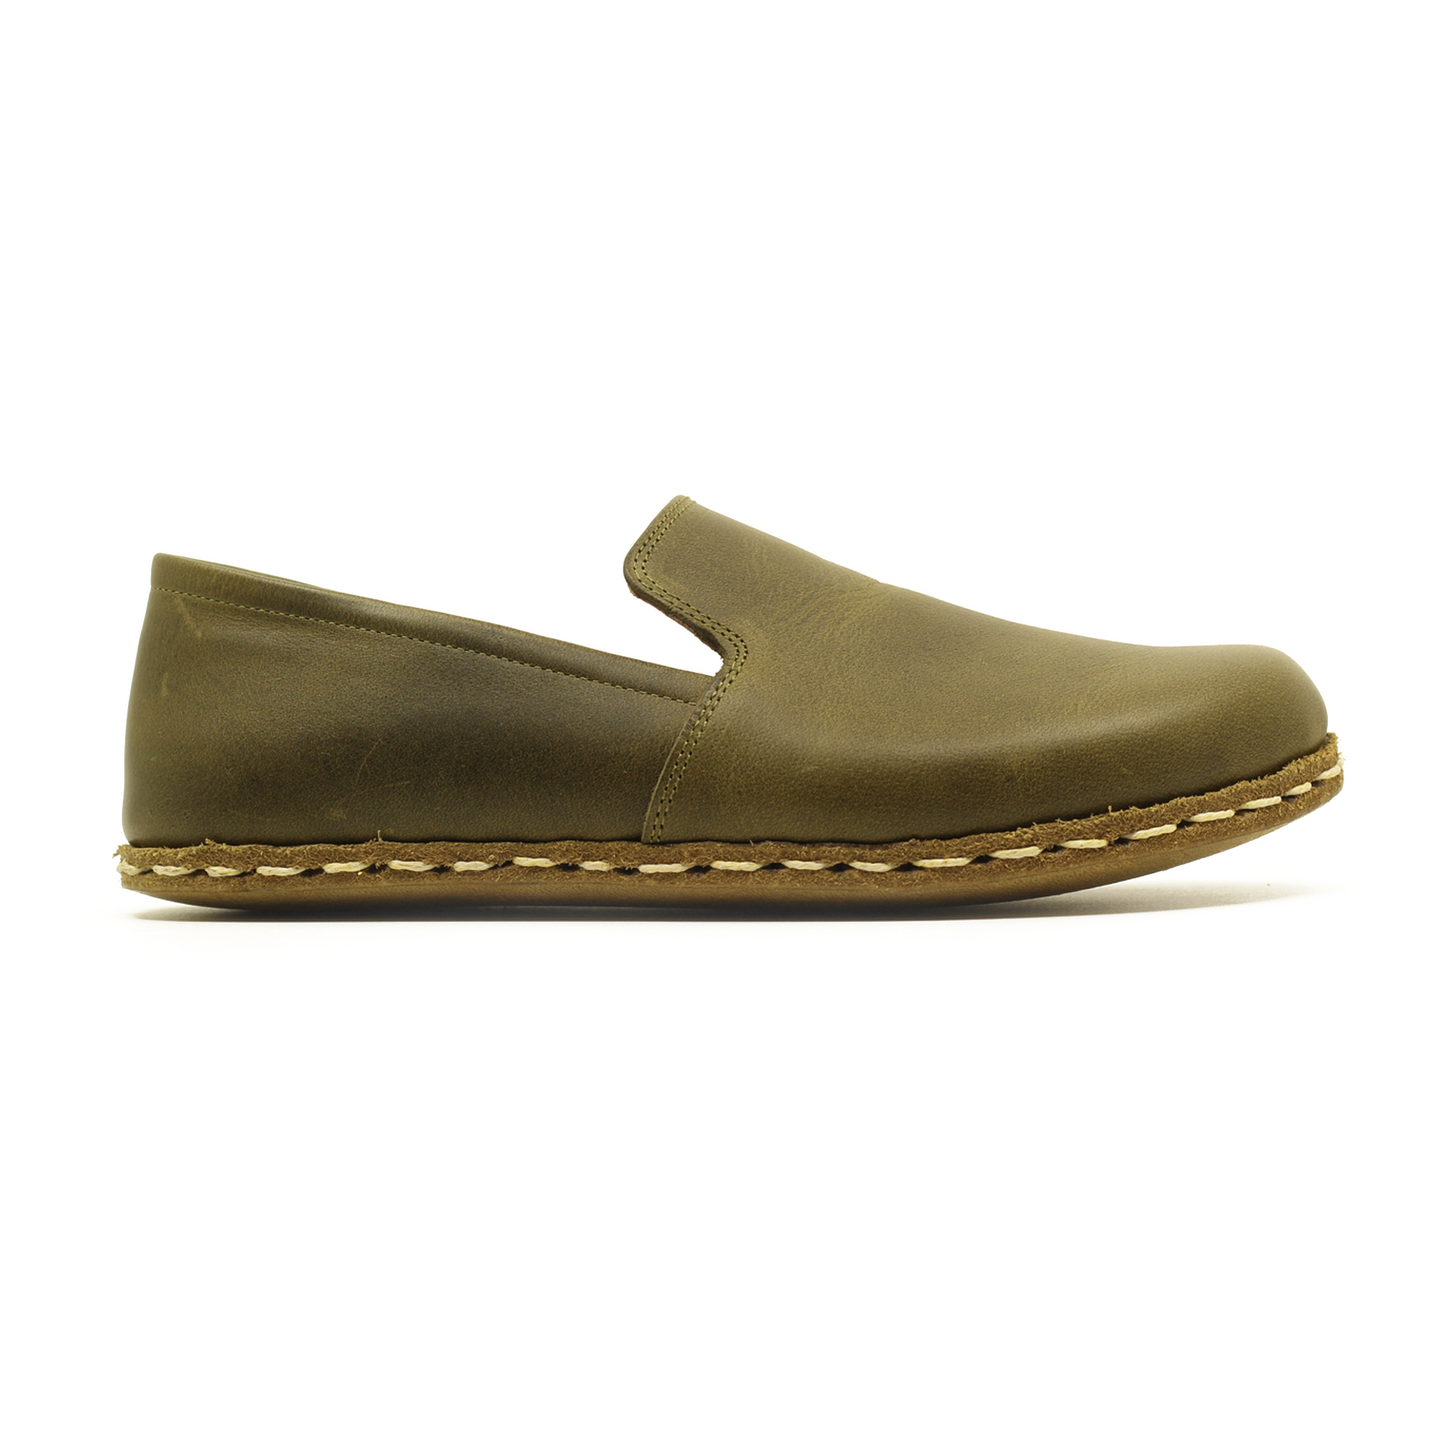 Men's Modern Barefoot Loafers in Military Green - Handmade Zero Drop Leather